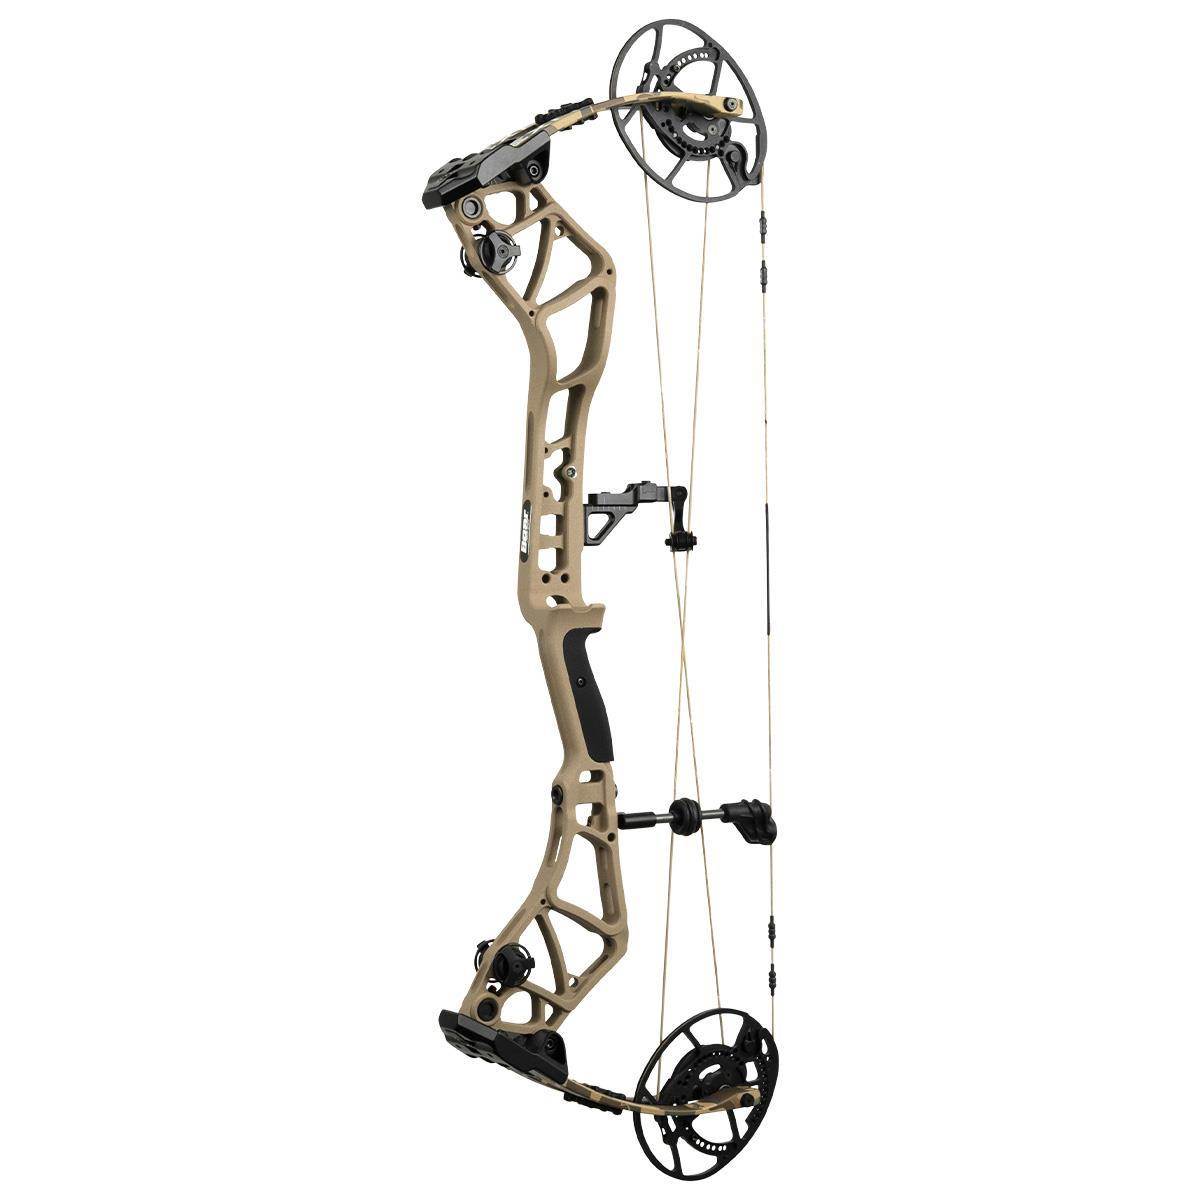 The Best Archery Deer Gear For 2023 - North American Whitetail